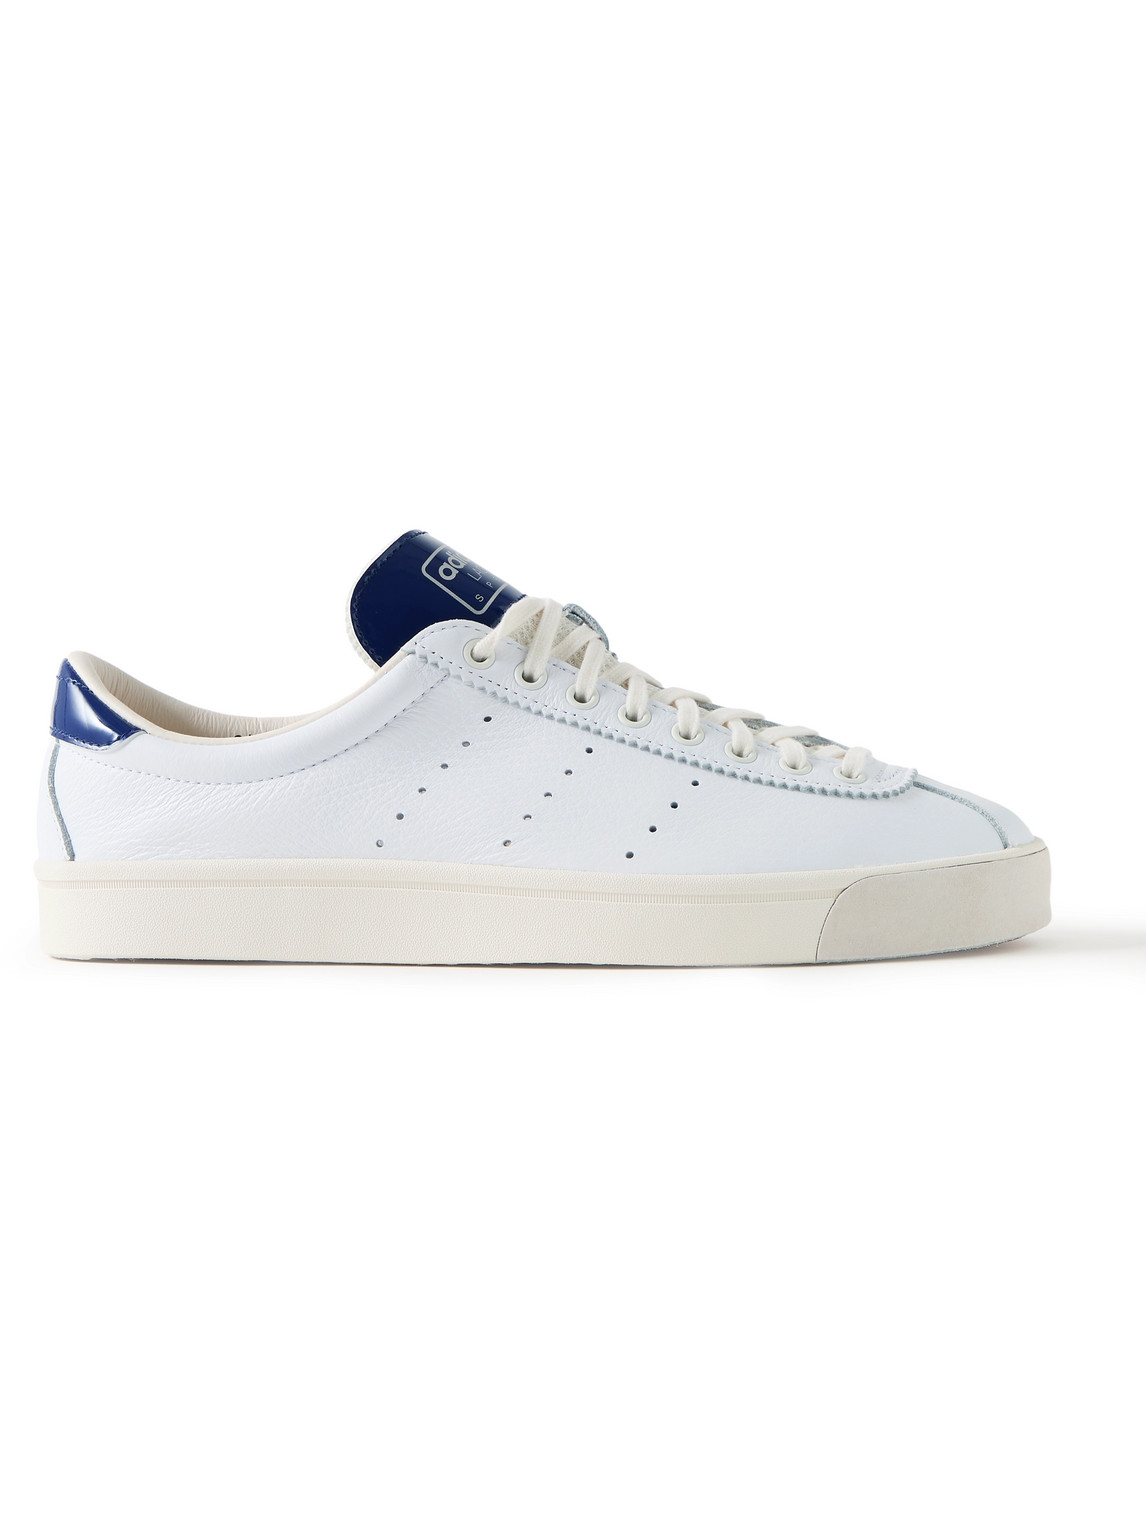 Adidas Originals Lacombe Spezial Rubber-trimmed Mesh And Leather Sneakers In White